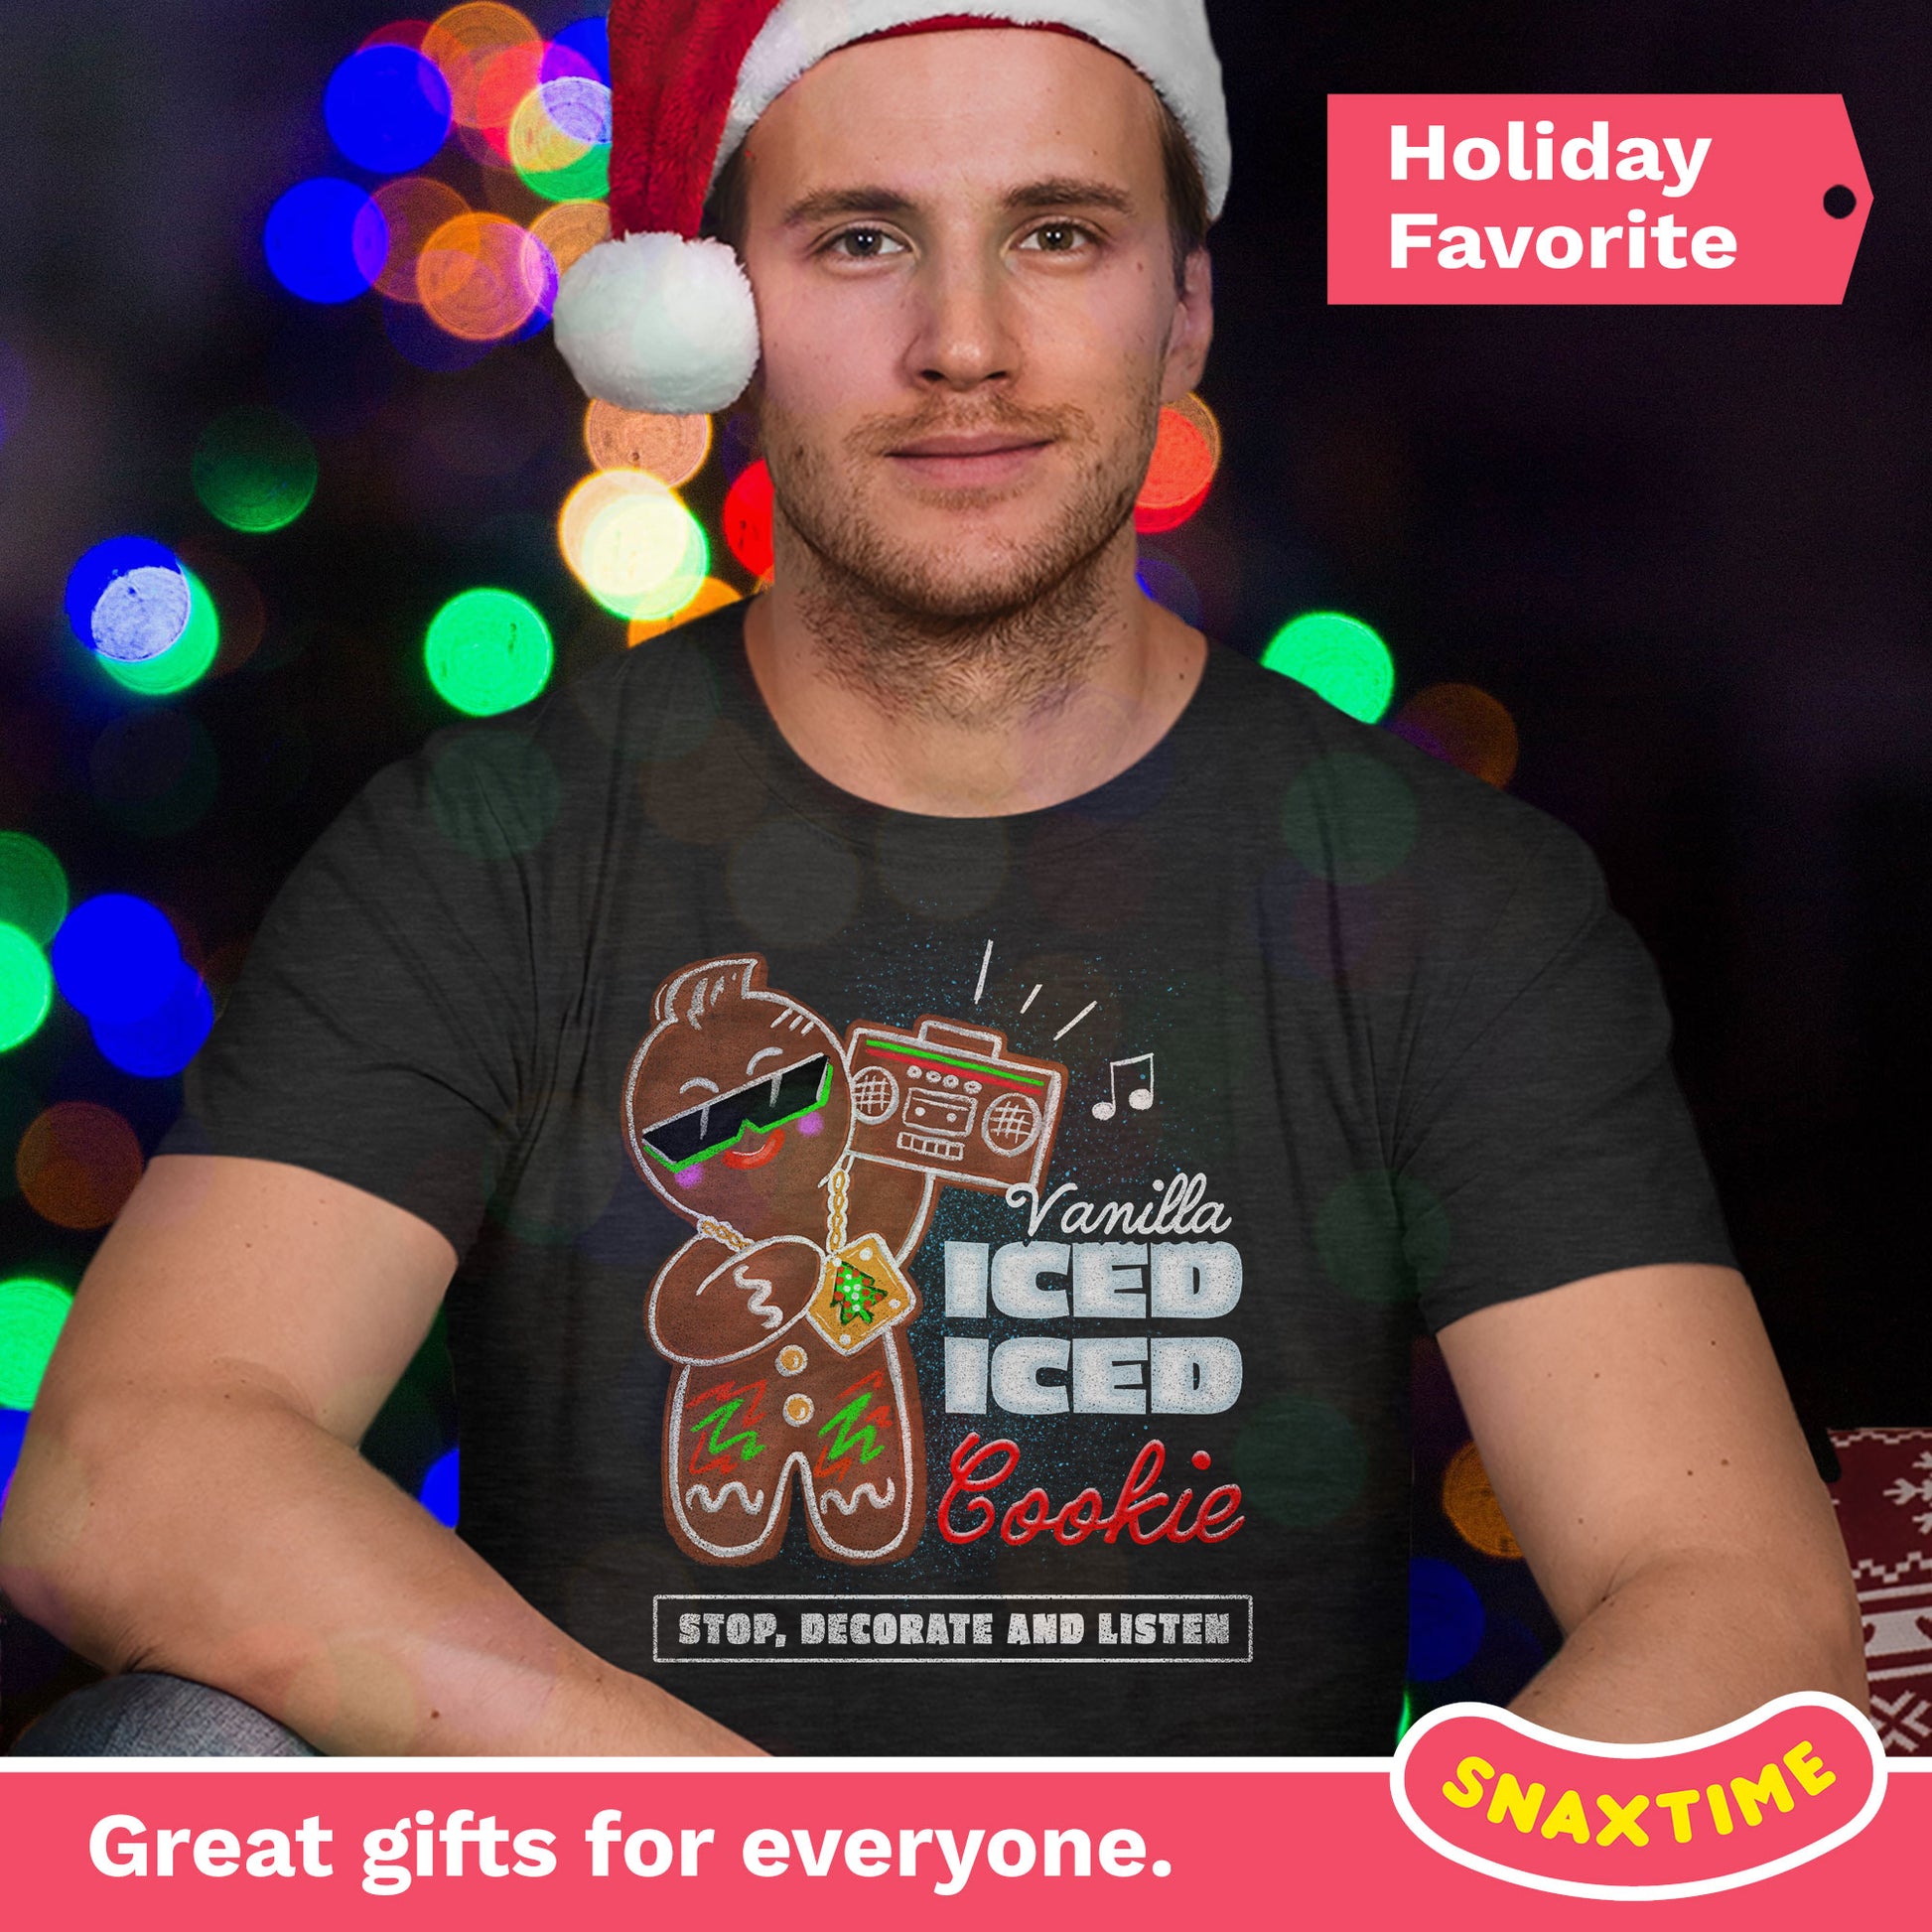  Vanilla Ice-d Gingerbread Cookie Graphic T-Shirt by Snaxtime